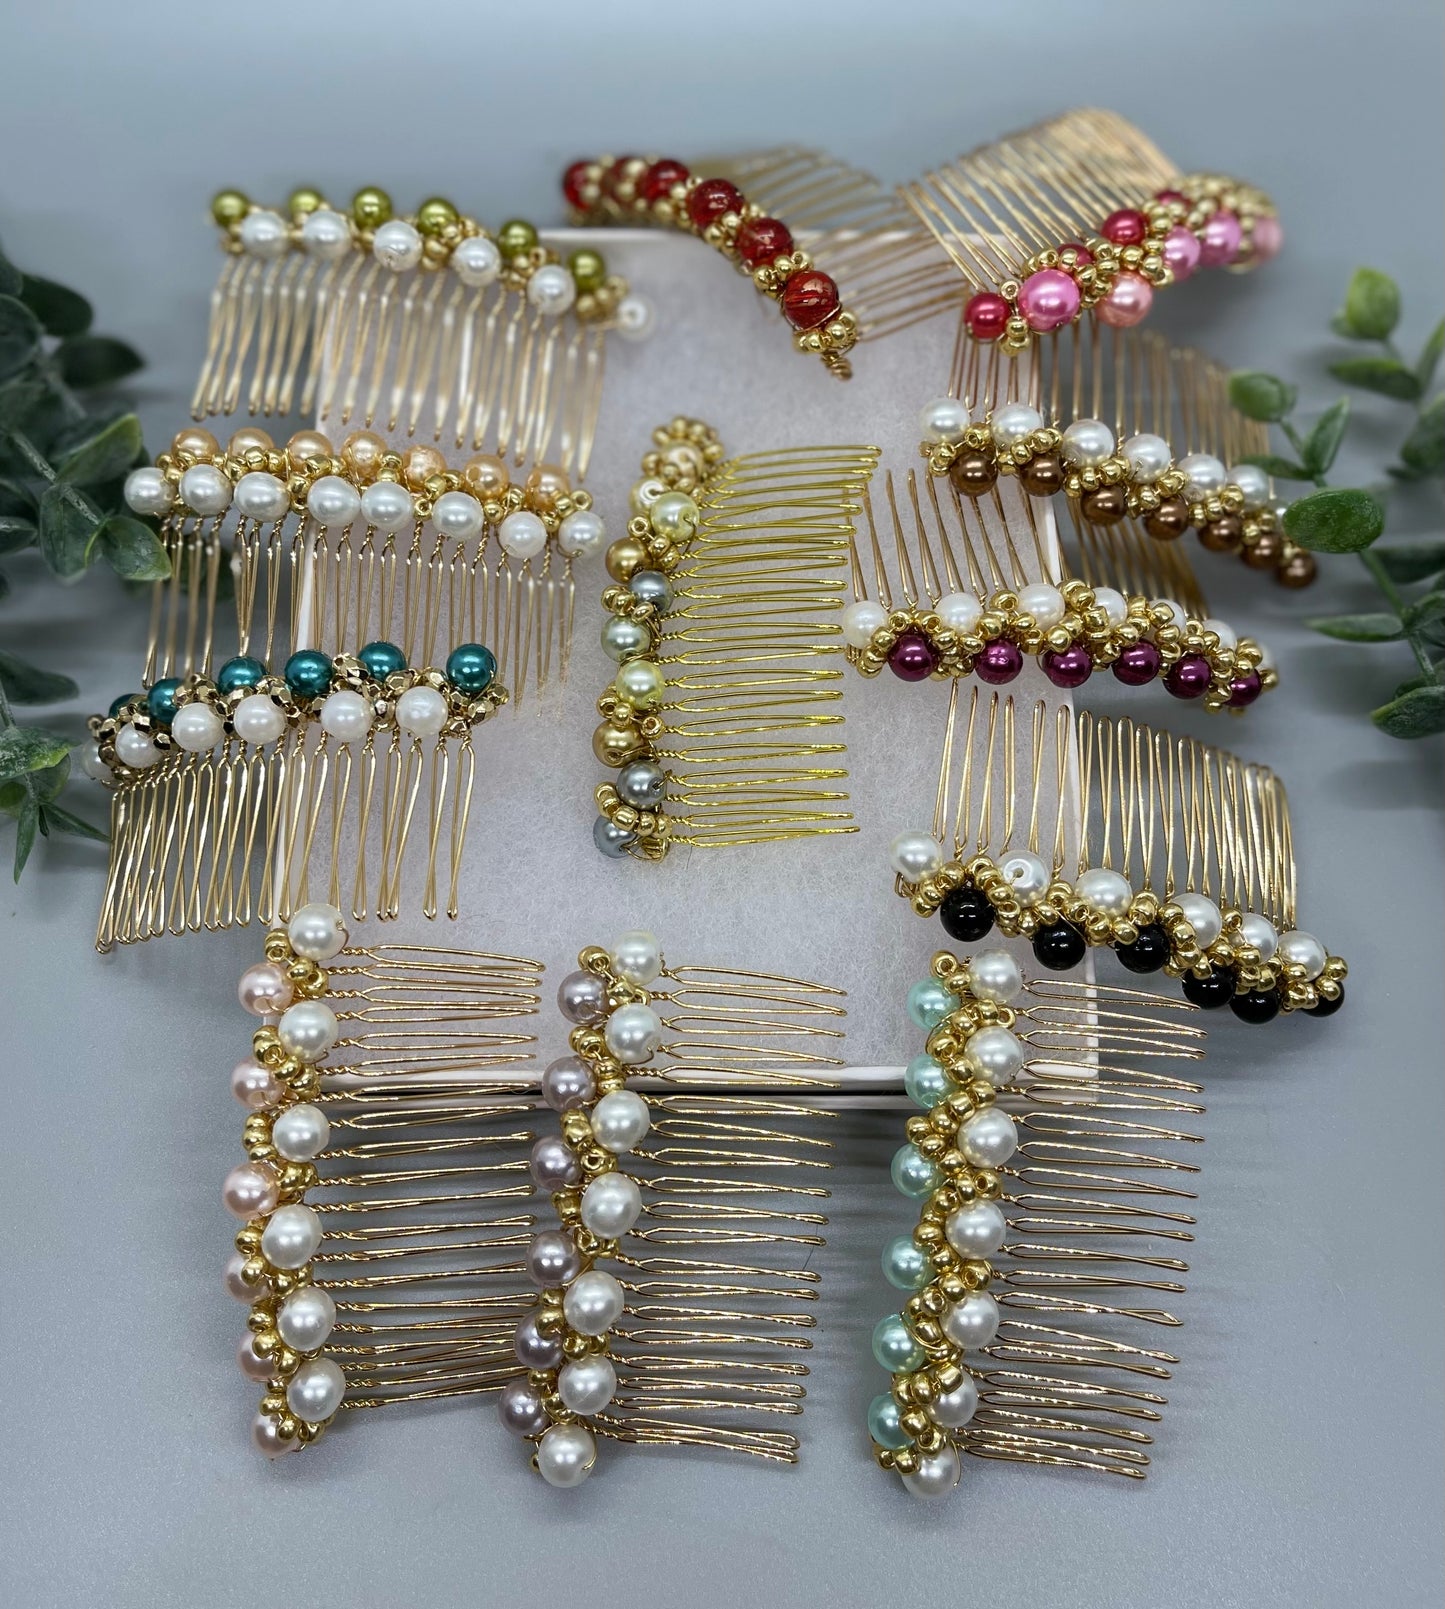 Olive green  gold beaded side Comb 3.5” gold Metal hair Accessories bridesmaid birthday princess wedding gift handmade accessories